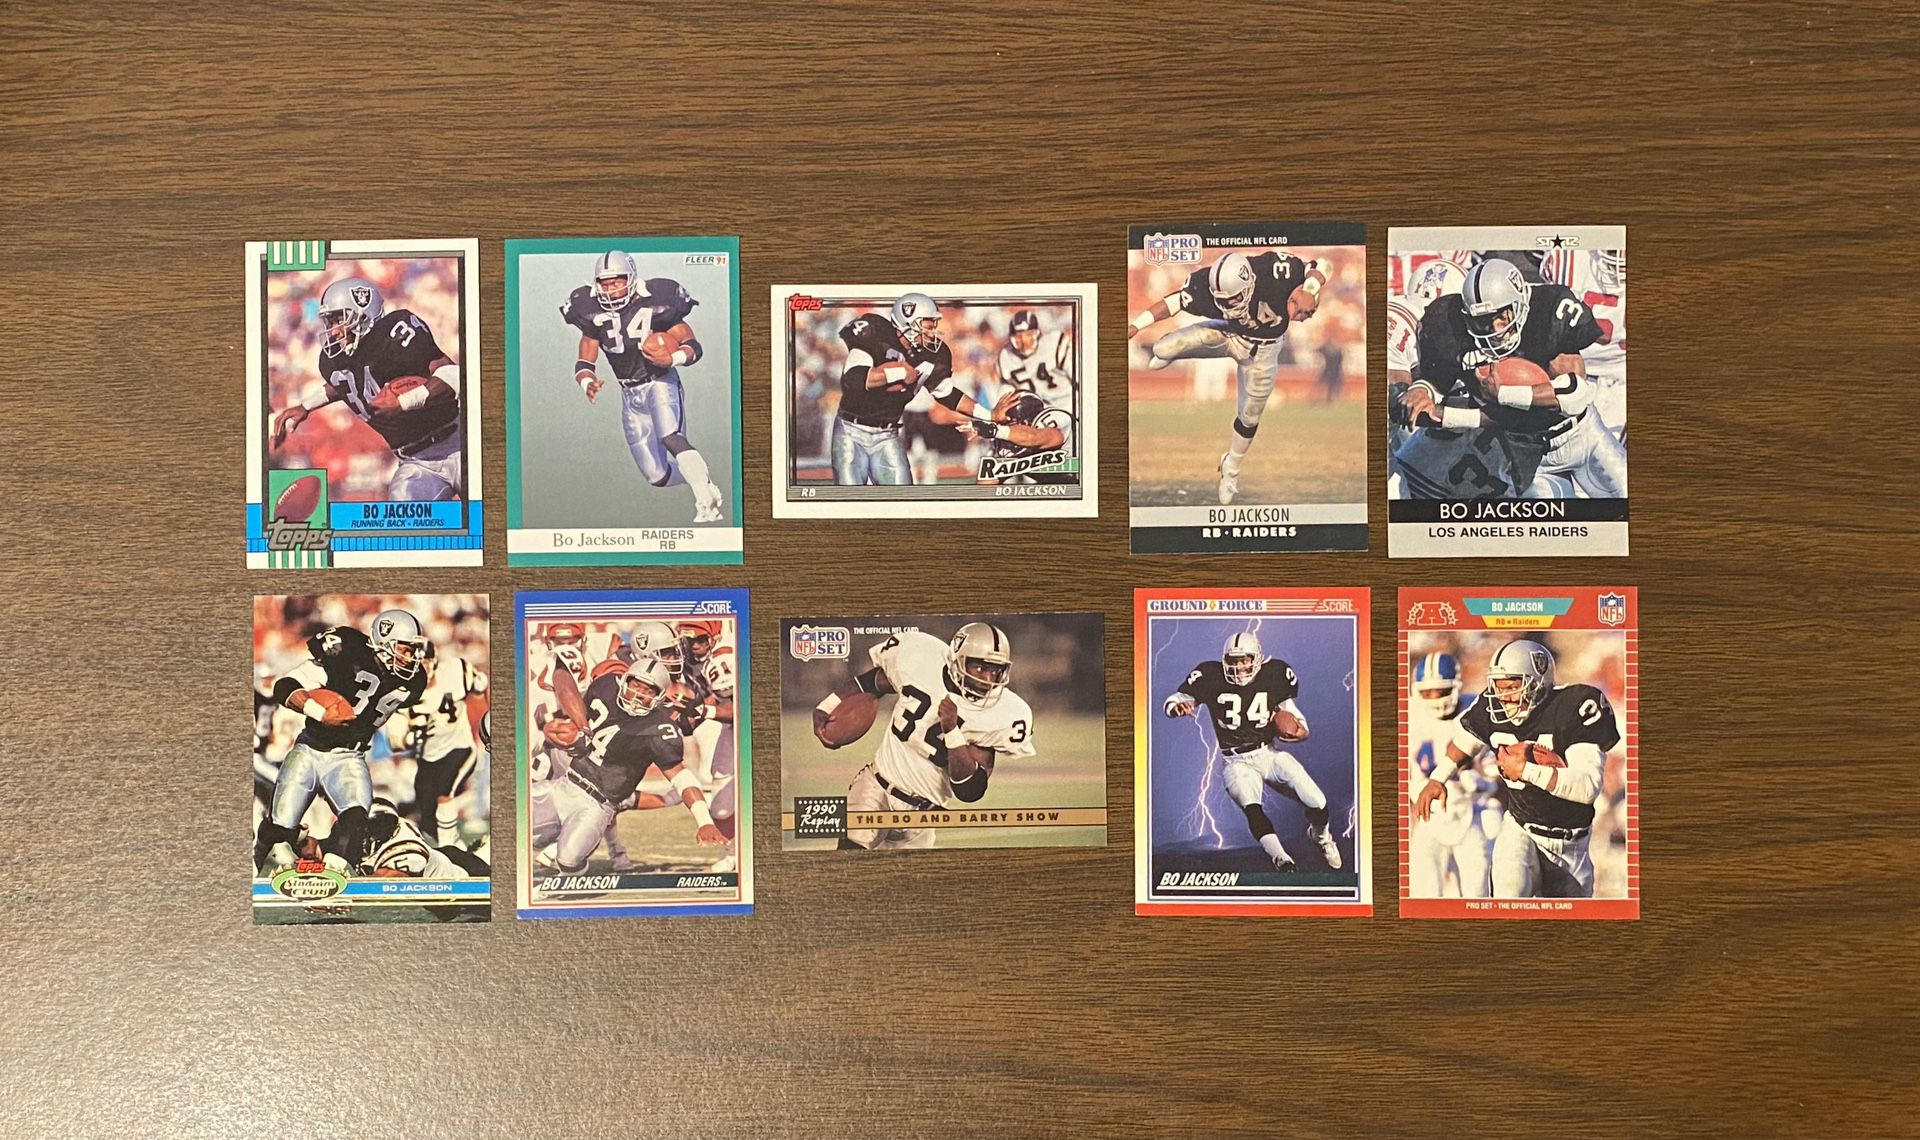 LOT OF 10 DIFFERENT BO JACKSON FOOTBALL CARDS x 10 NO DUPS LOS ANGELES RAIDERS